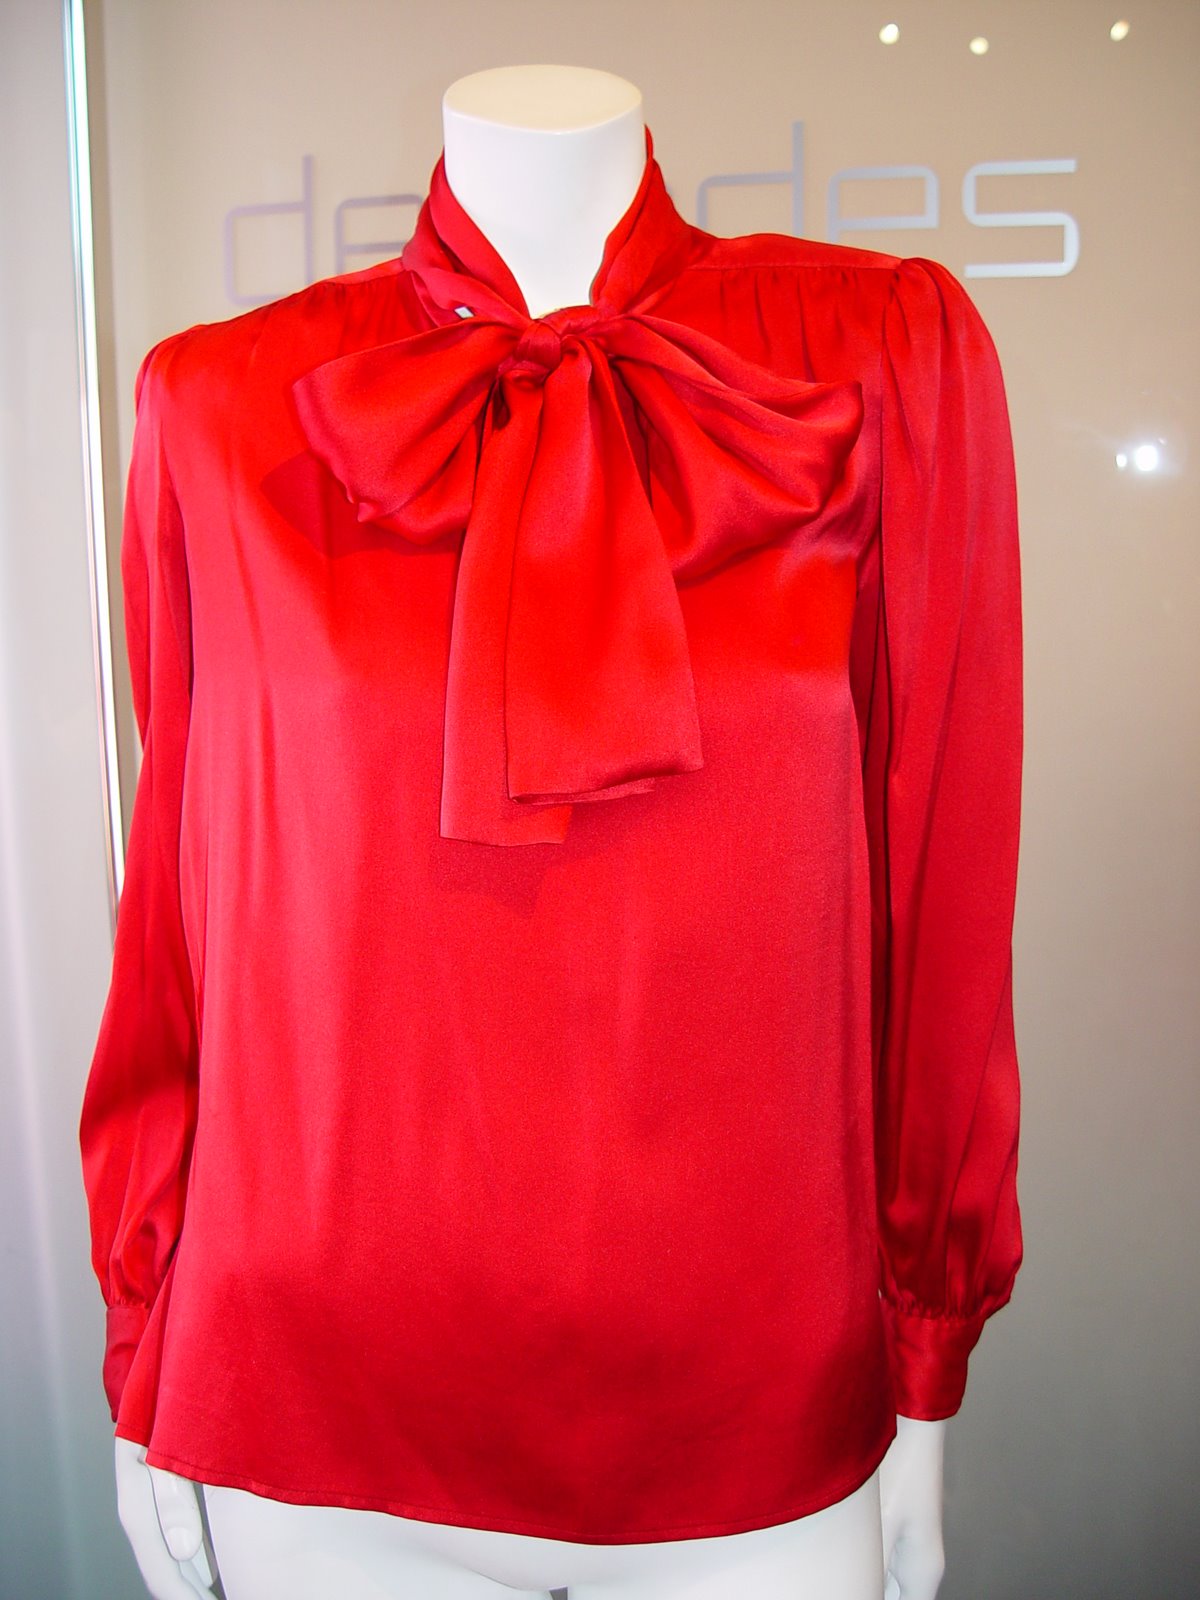 [YSL+RIVE+GAUCHE+CLASSIC+RED+SILK+SATIN+PULLOVER+BLOUSE+WITH+SINGLE+BUTTON+KEY+HOLE+AND+BOWN+TIE+FRONT+SIZE+34+C+80S.JPG.JPG]